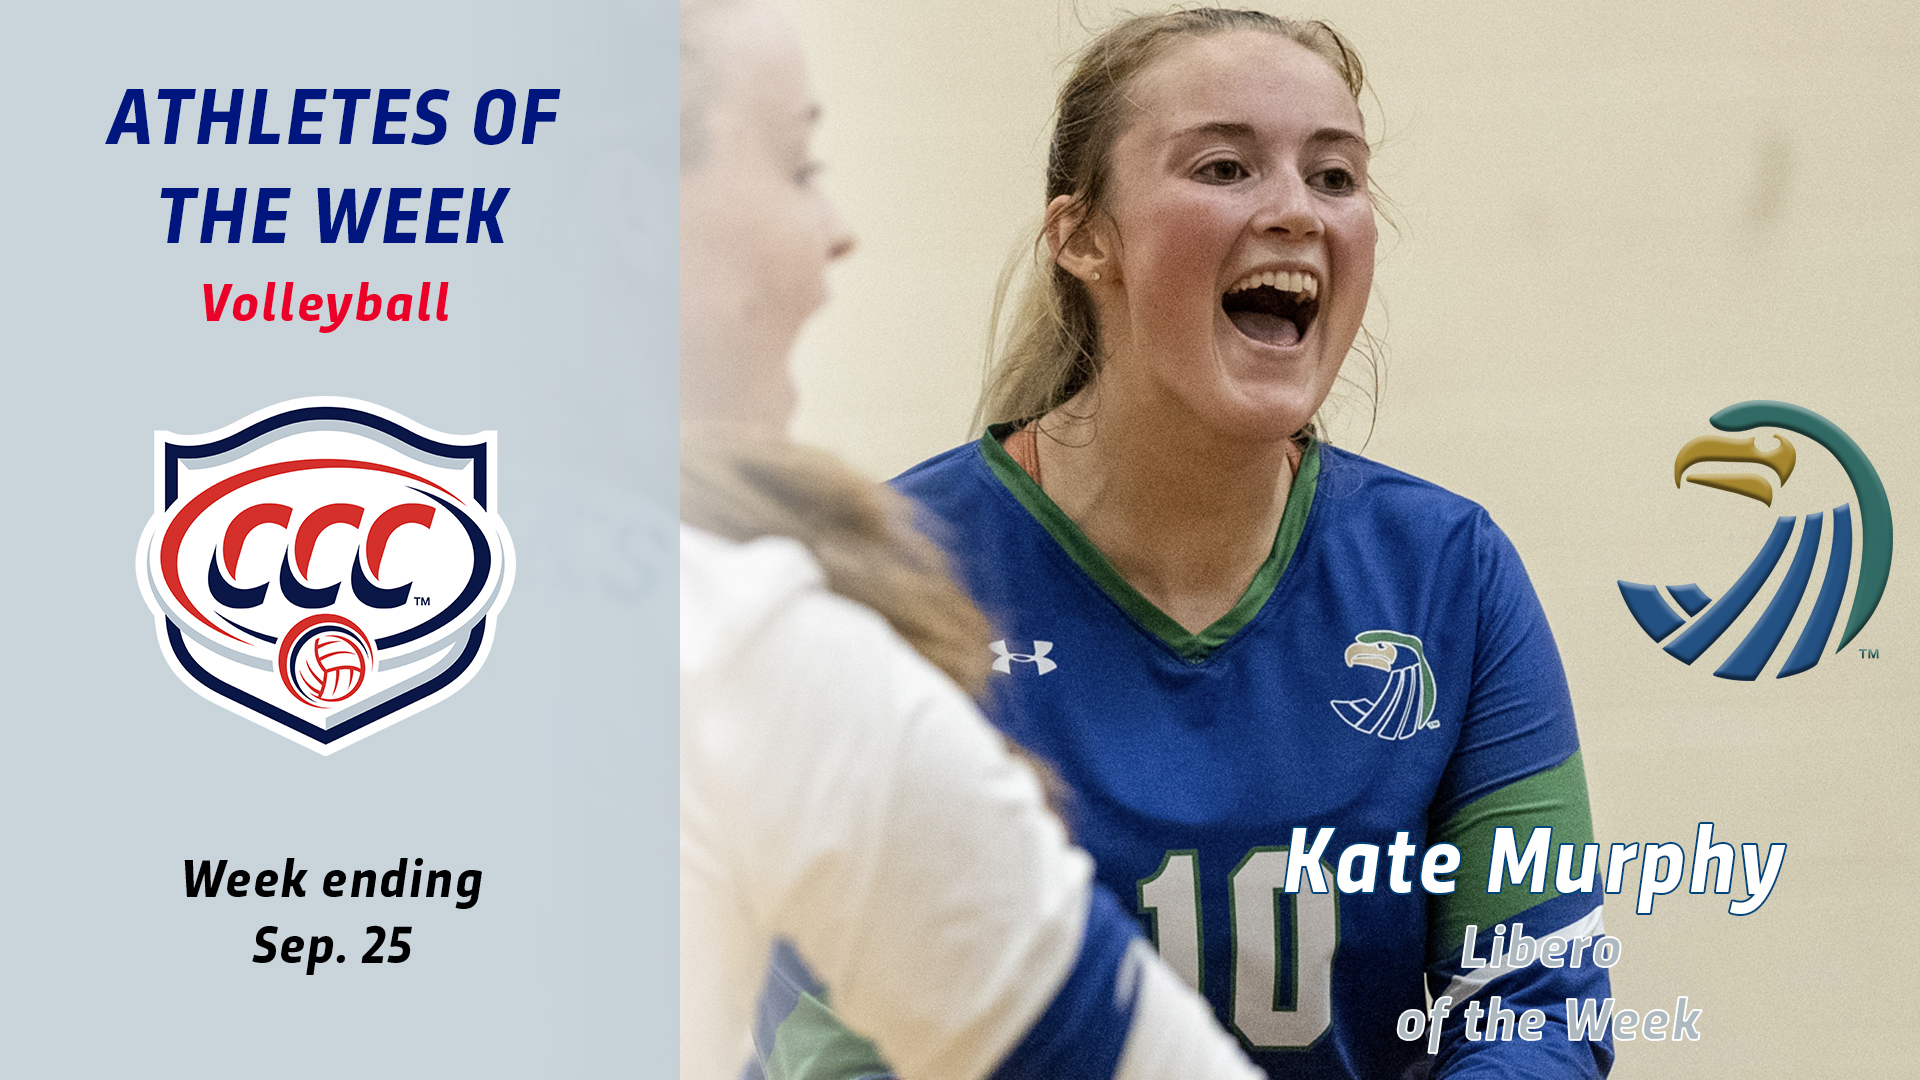 Kate Murphy was named CCC Libero of the Week.